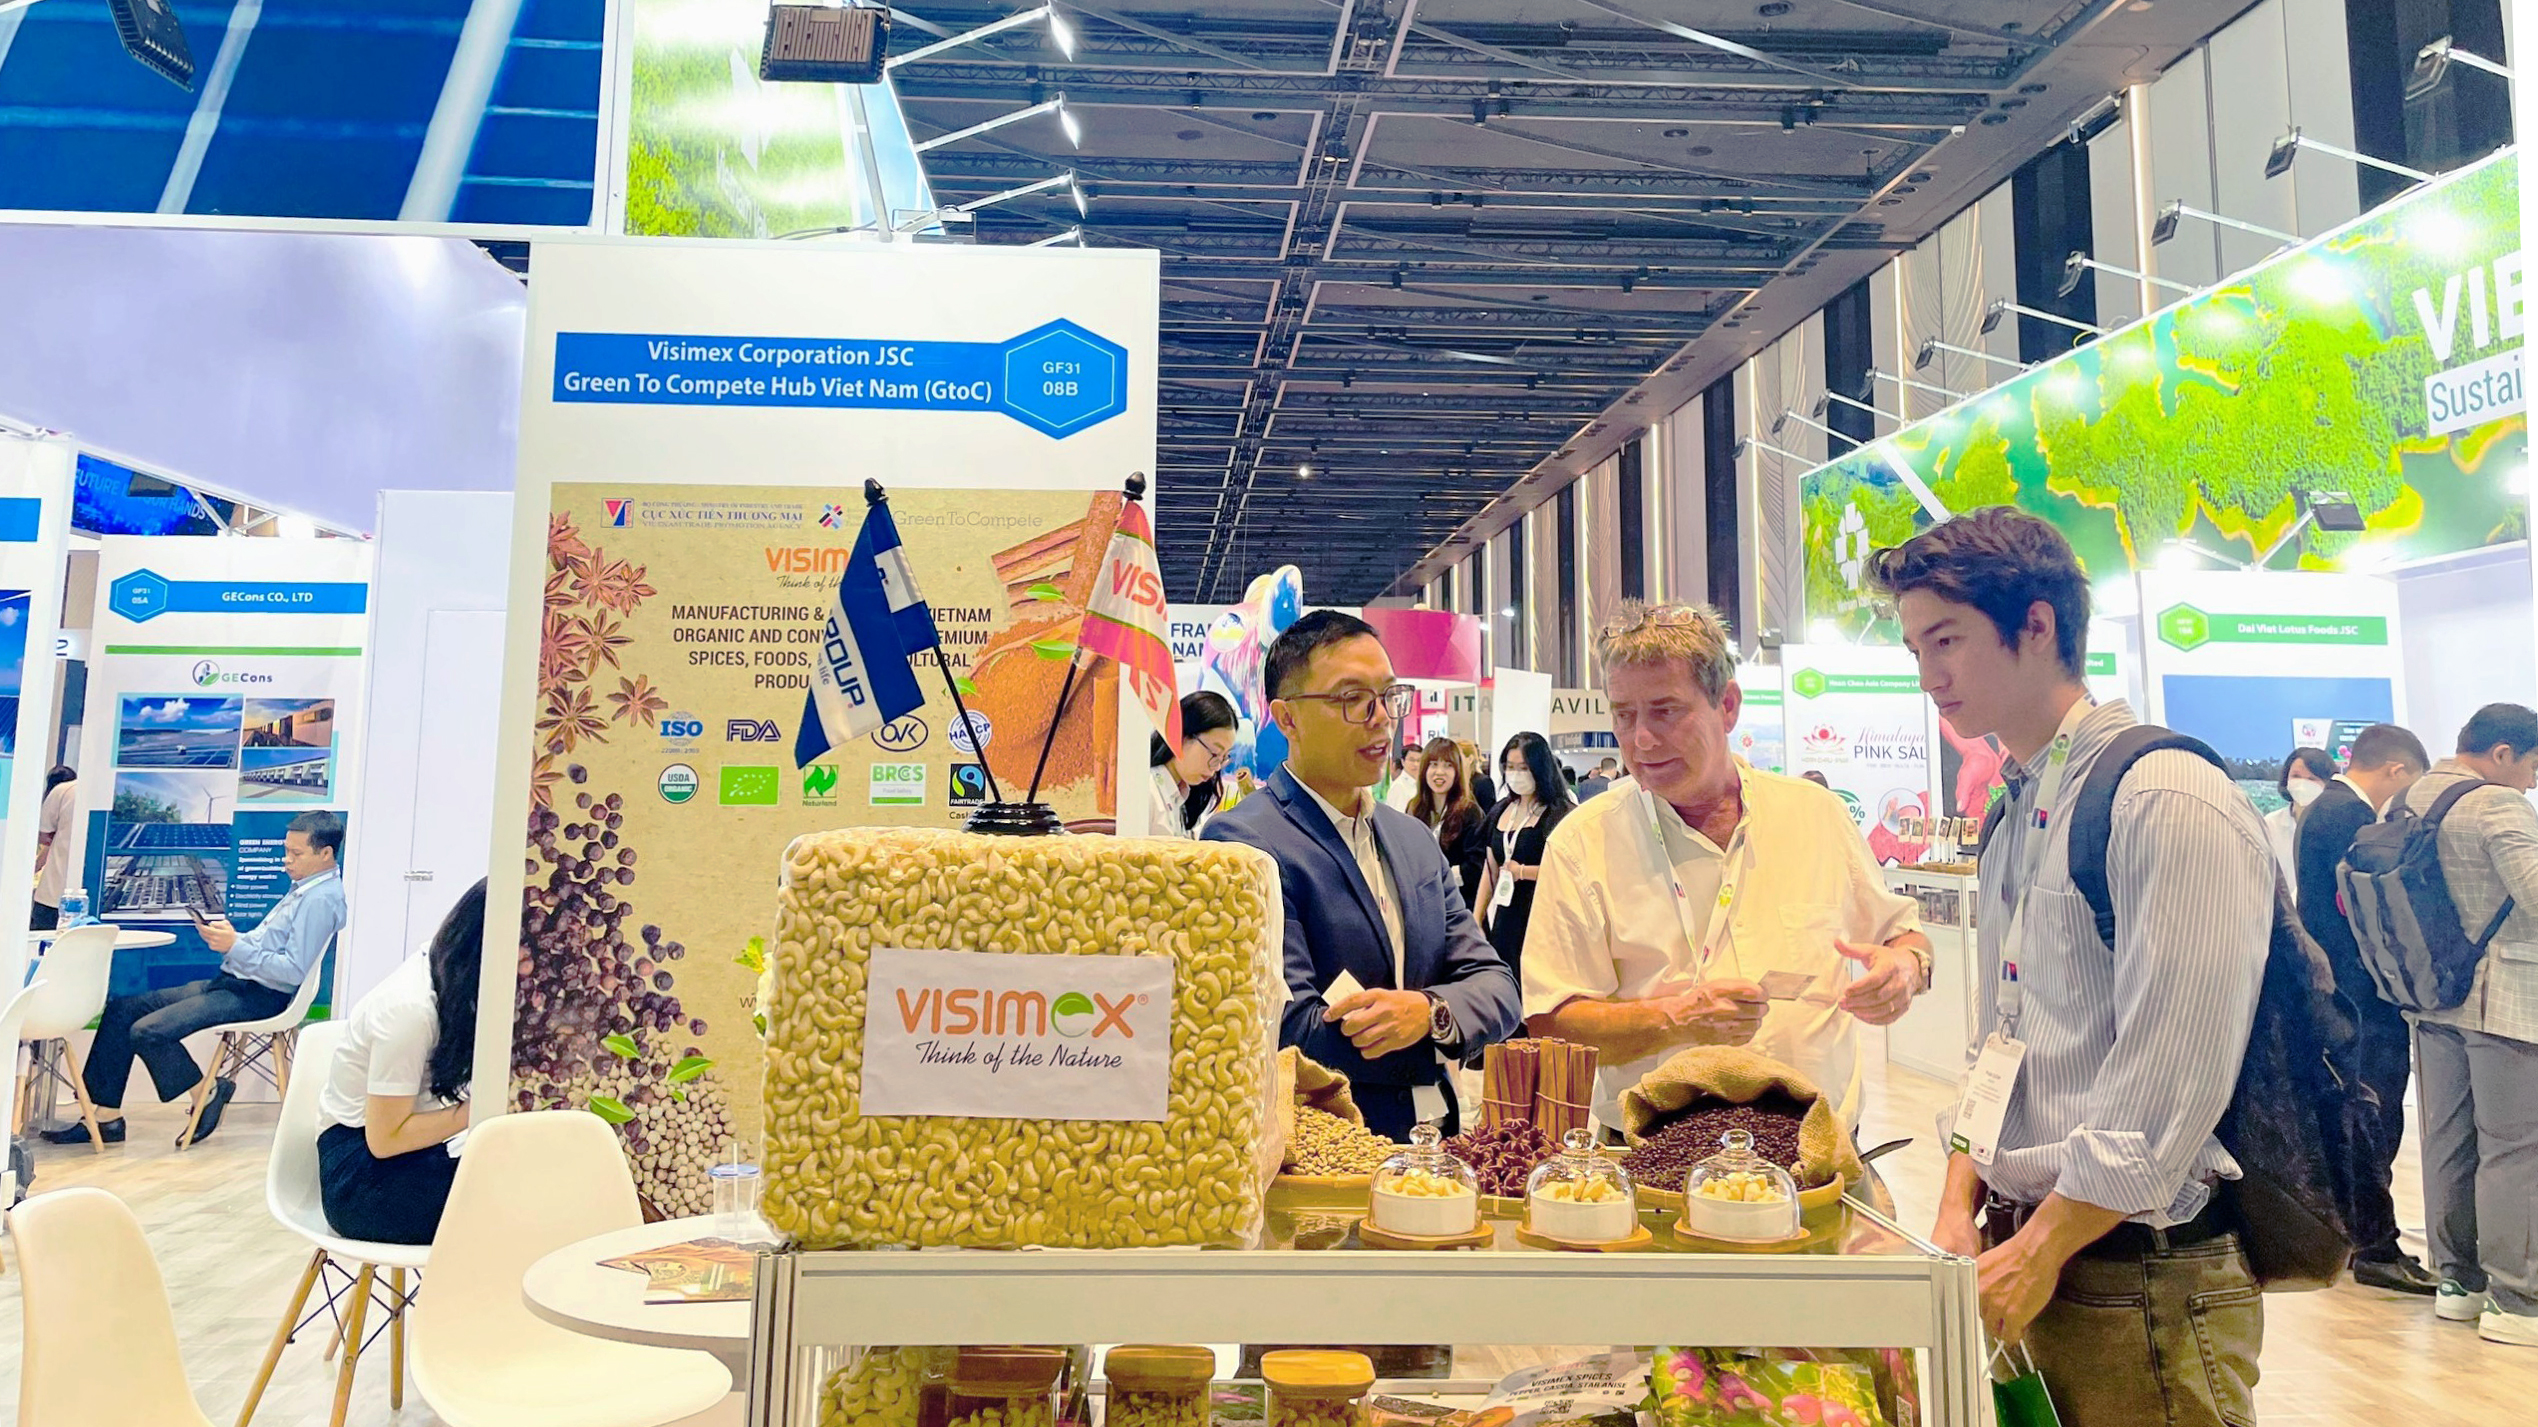 This morning, Monday, November 28, 2022, the Green Economy Forum & Exhibition (GEFE) 2022, organized by the European Chamber of Commerce in Vietnam (EuroCham), officially opened with a series of activities related to the topic of business management, and sustainable development.